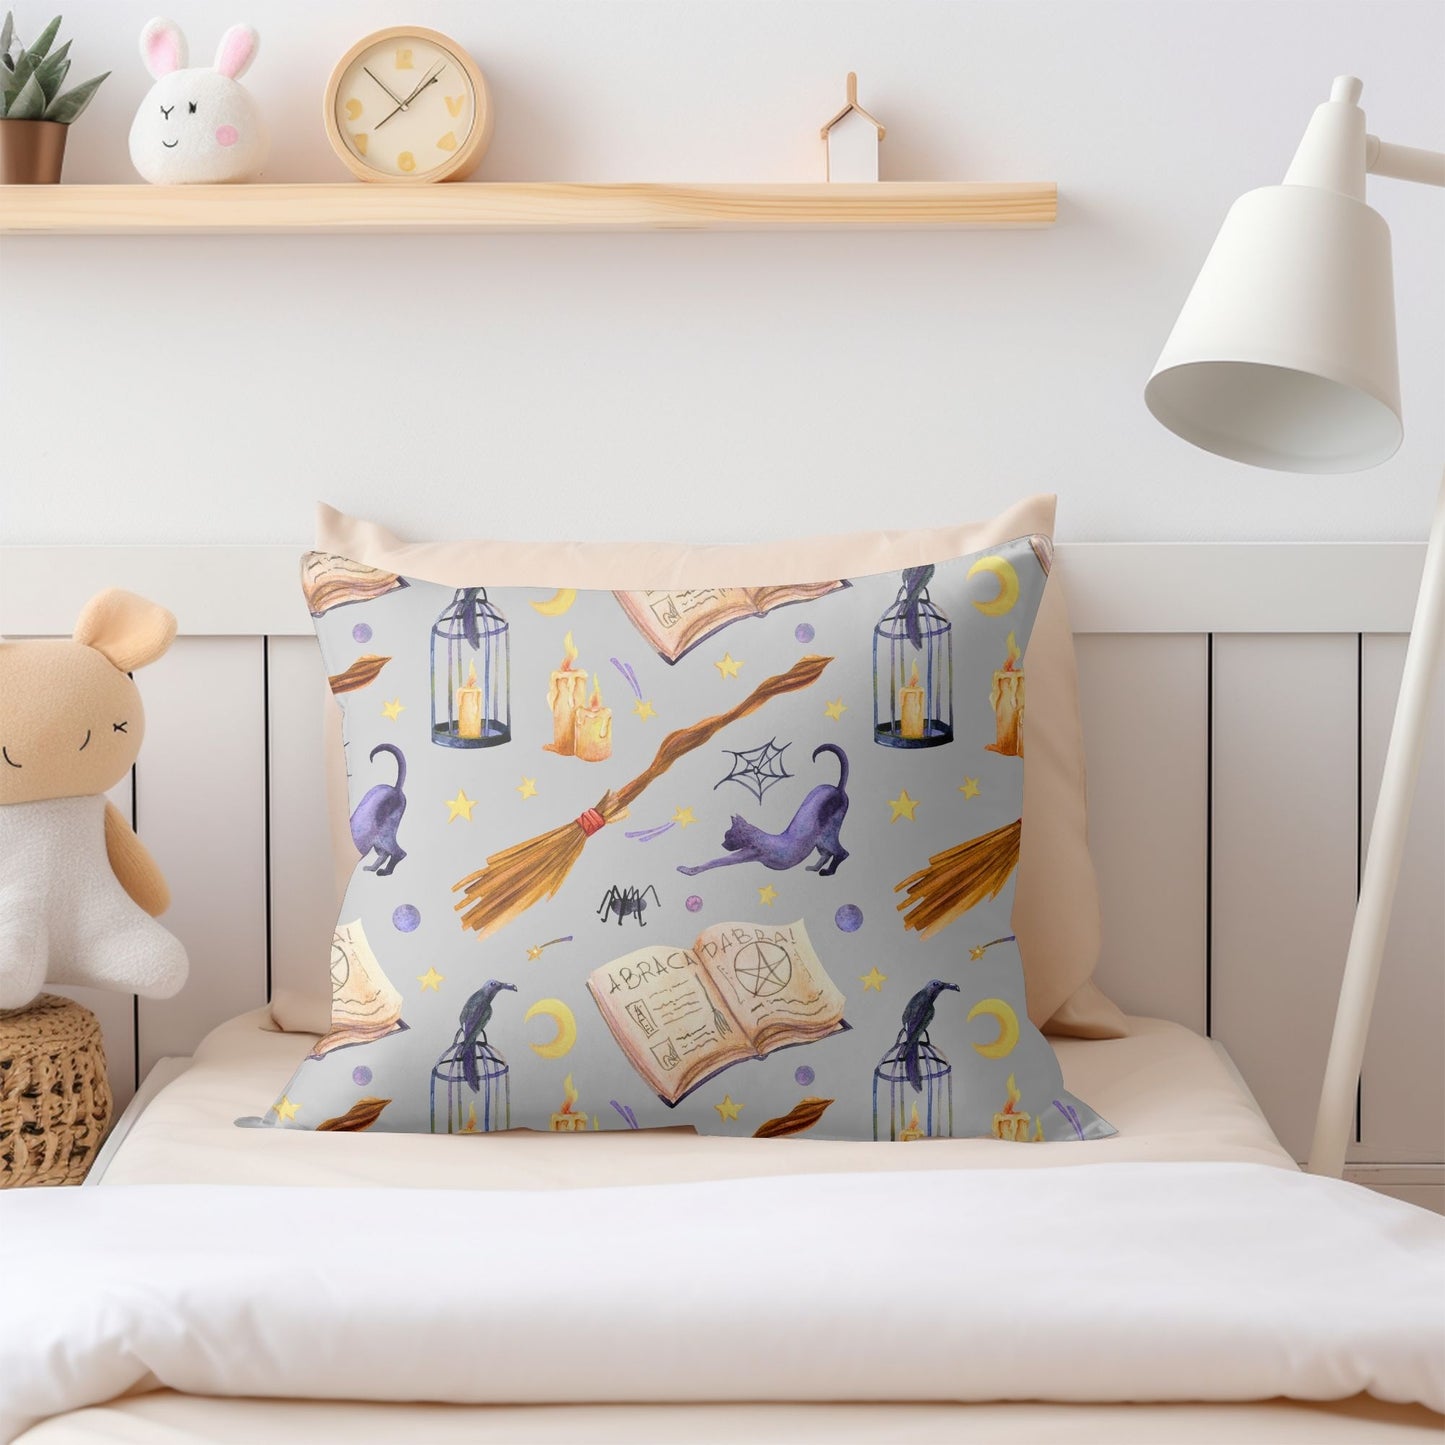 Fun-filled pillow featuring magical wizarding designs for kids' spaces.